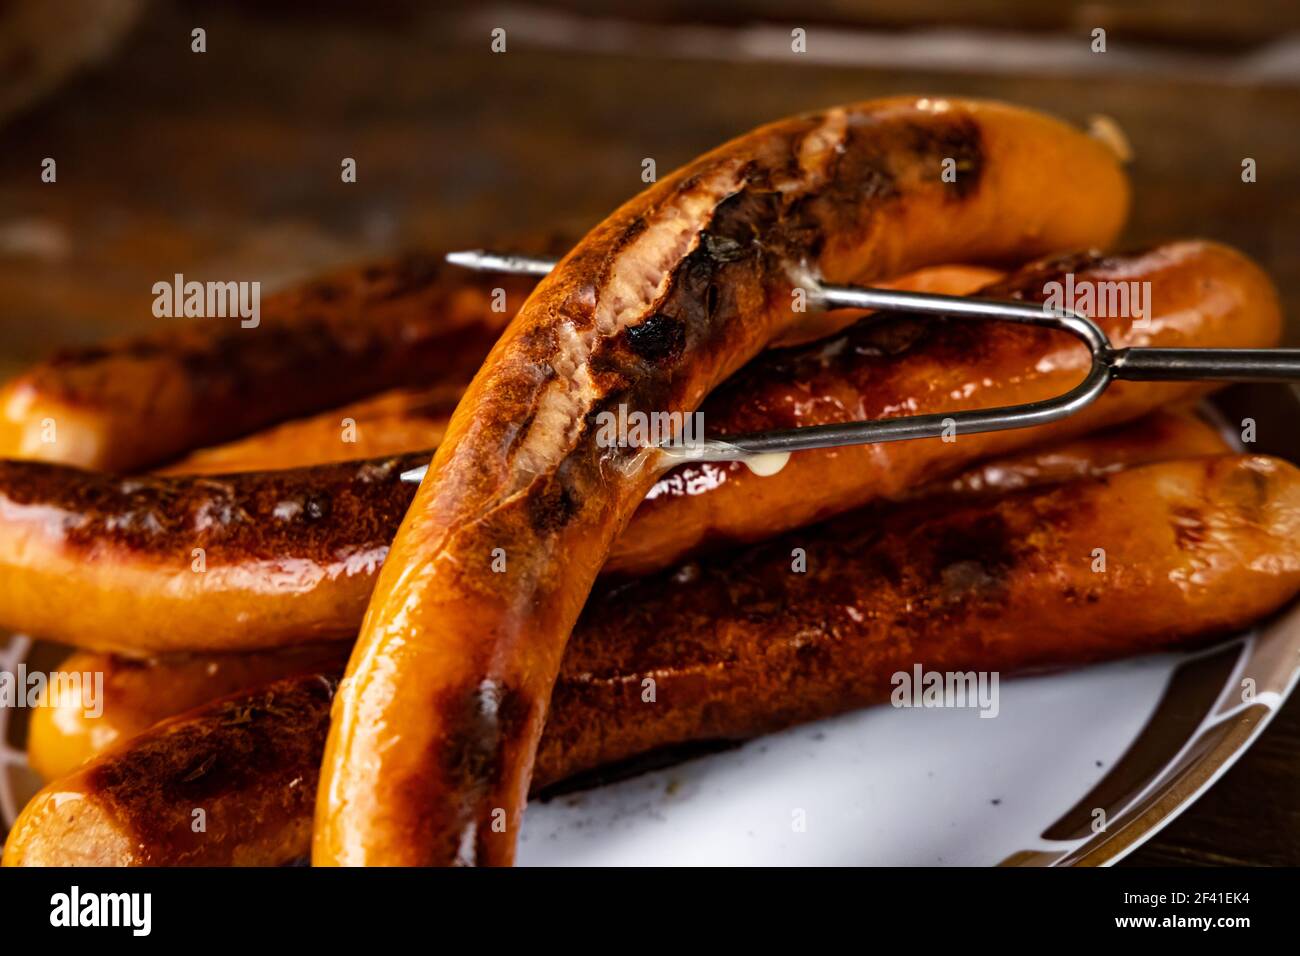 Grilled sausages on wooden board Stock Photo